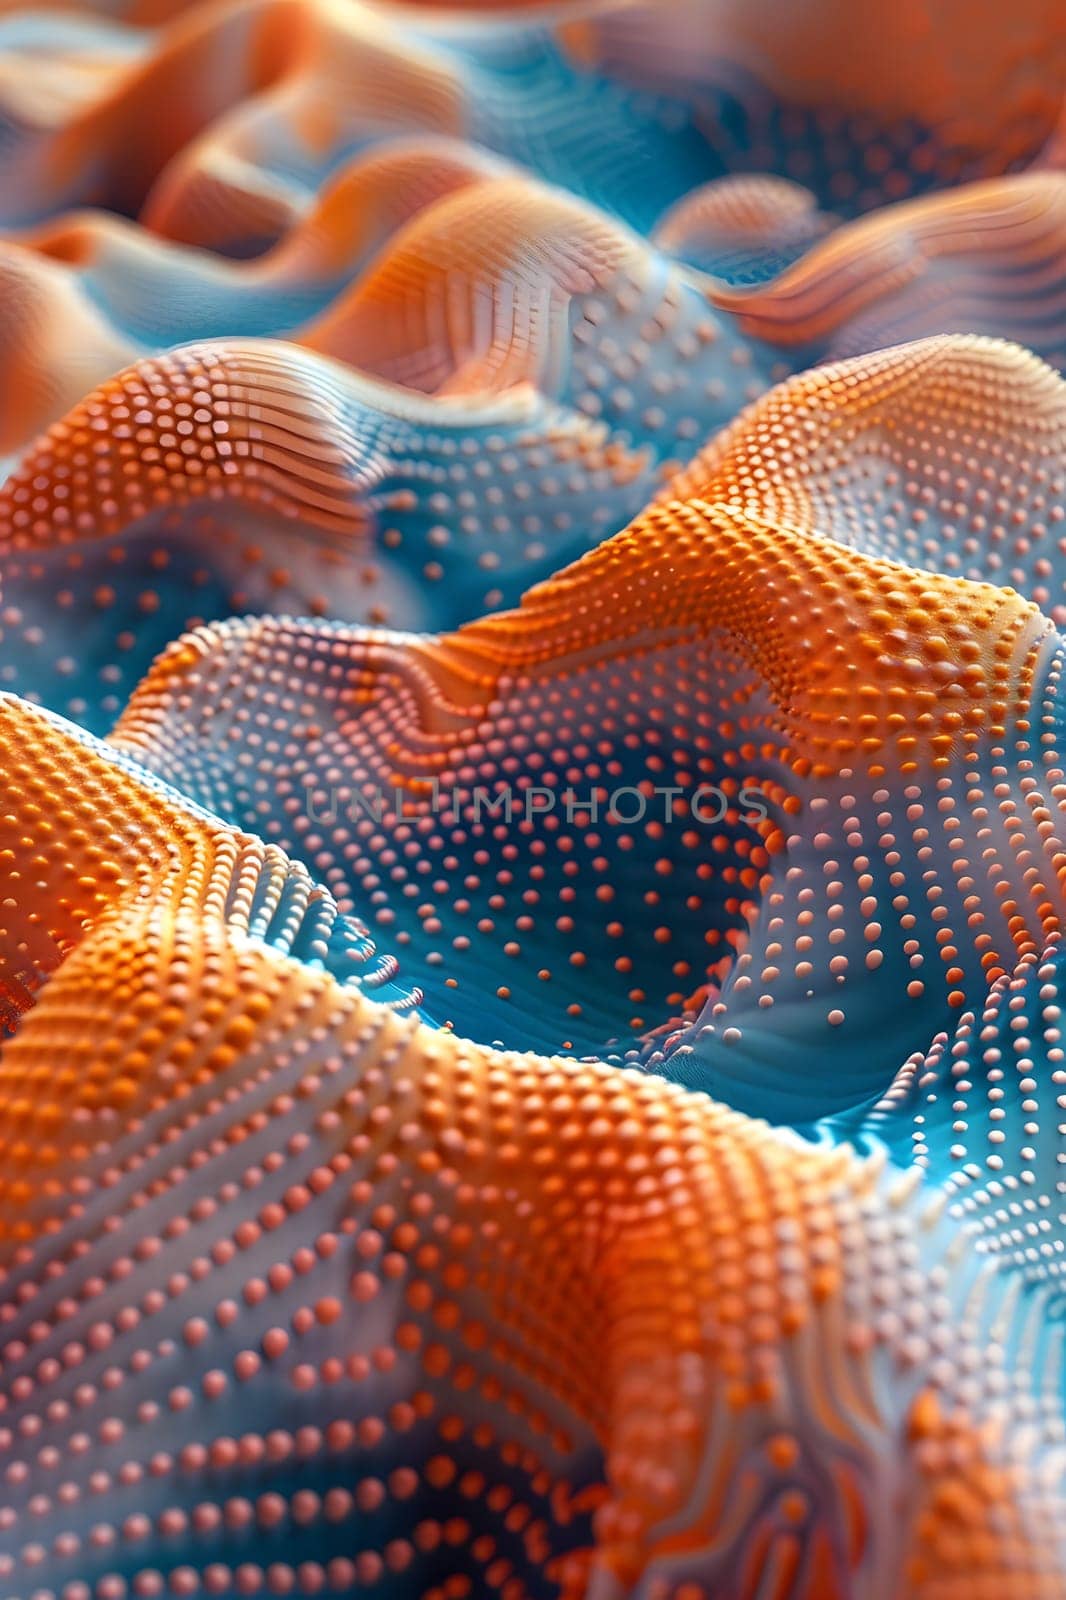 a close up of an orange and blue wave with dots on it by Nadtochiy